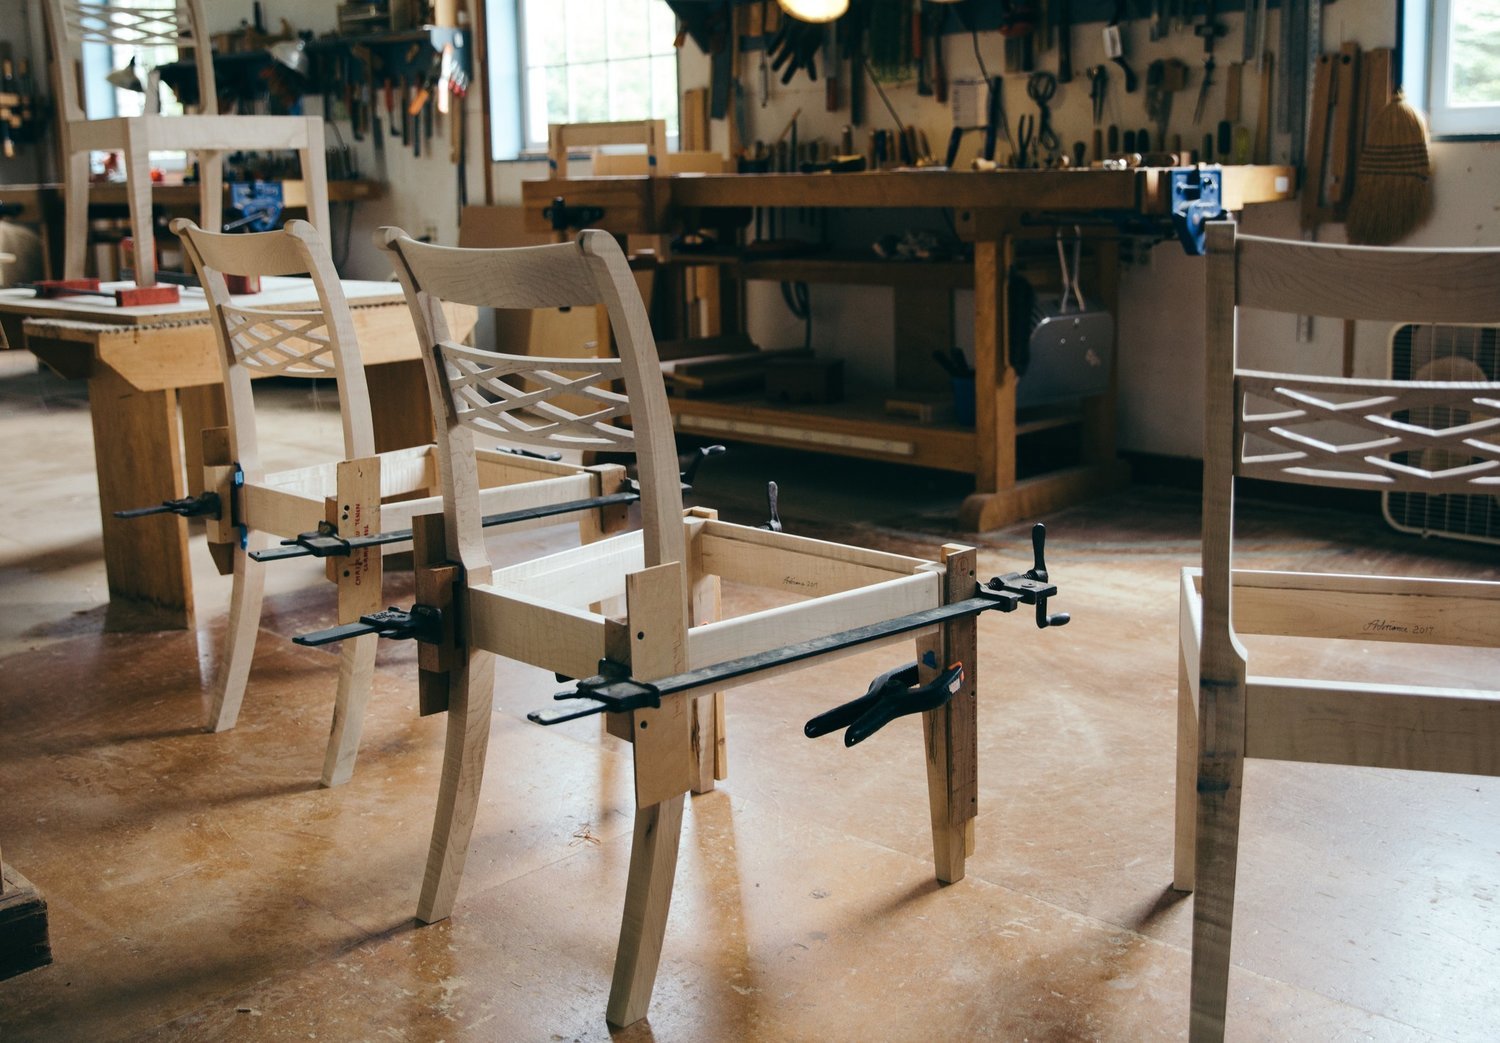 A set of chairs, under construction, by Adriance.